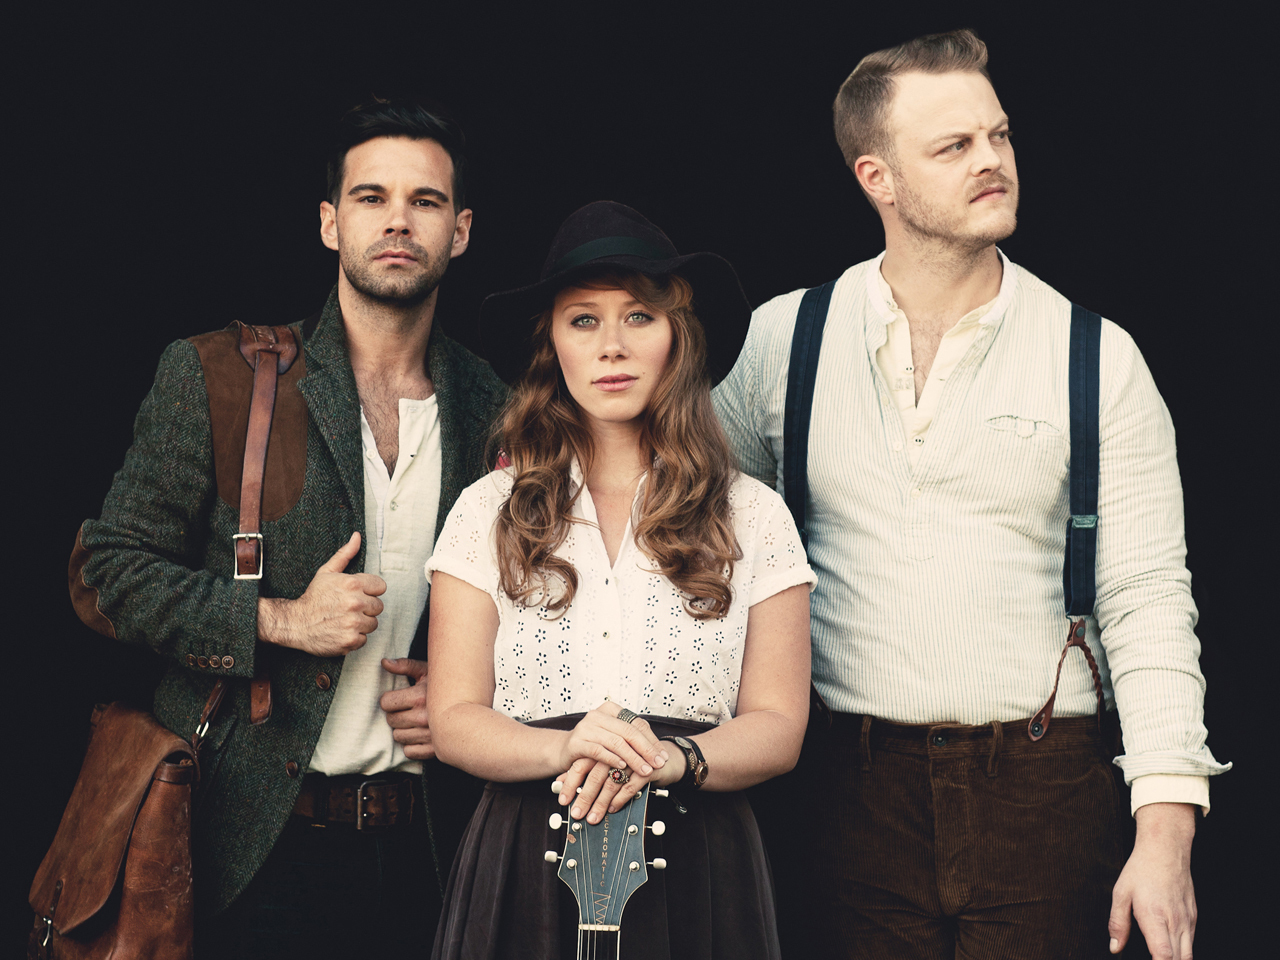 The Lone Bellow at Knitting Factory